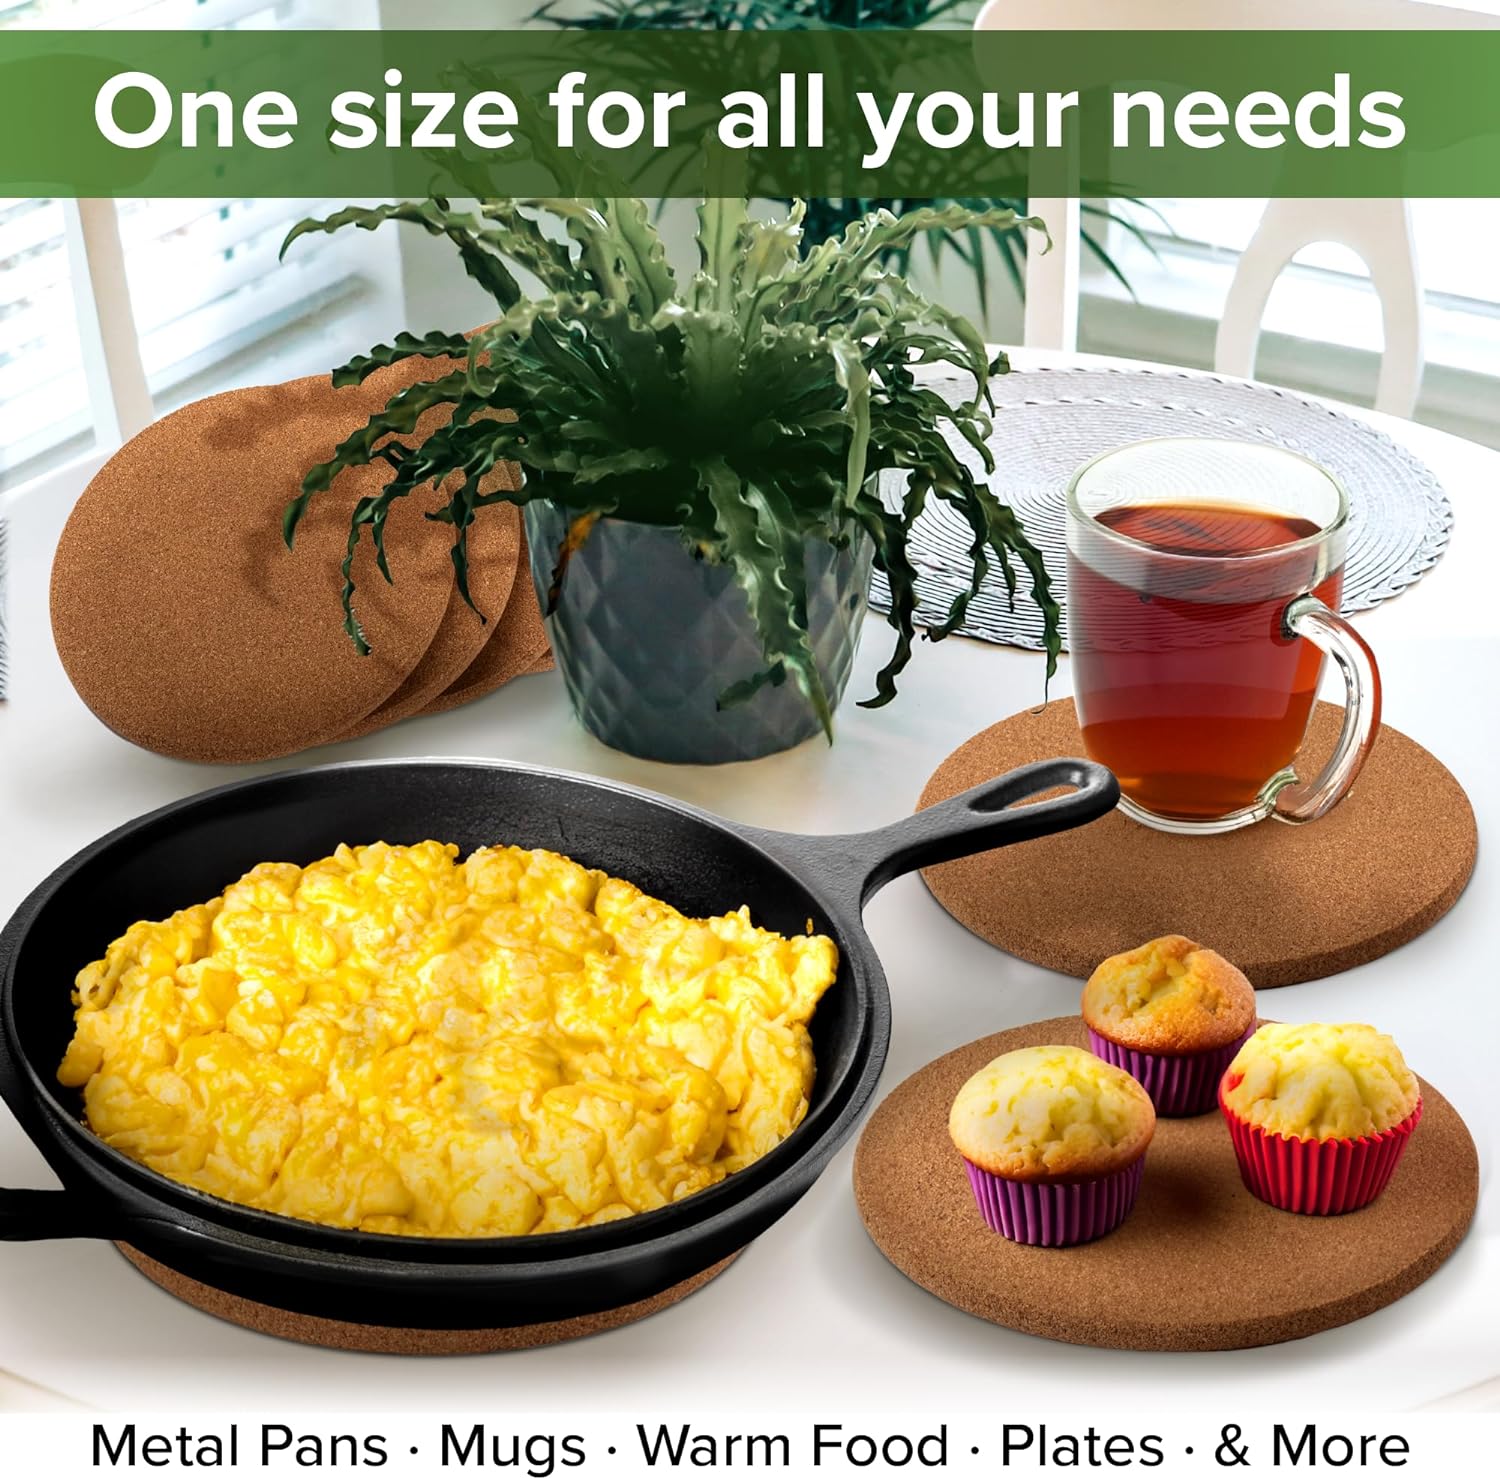 a pan of scrambled eggs and muffins on a table with text: 'One size for all your needs Metal Pans Mugs Warm Food Plates & More'